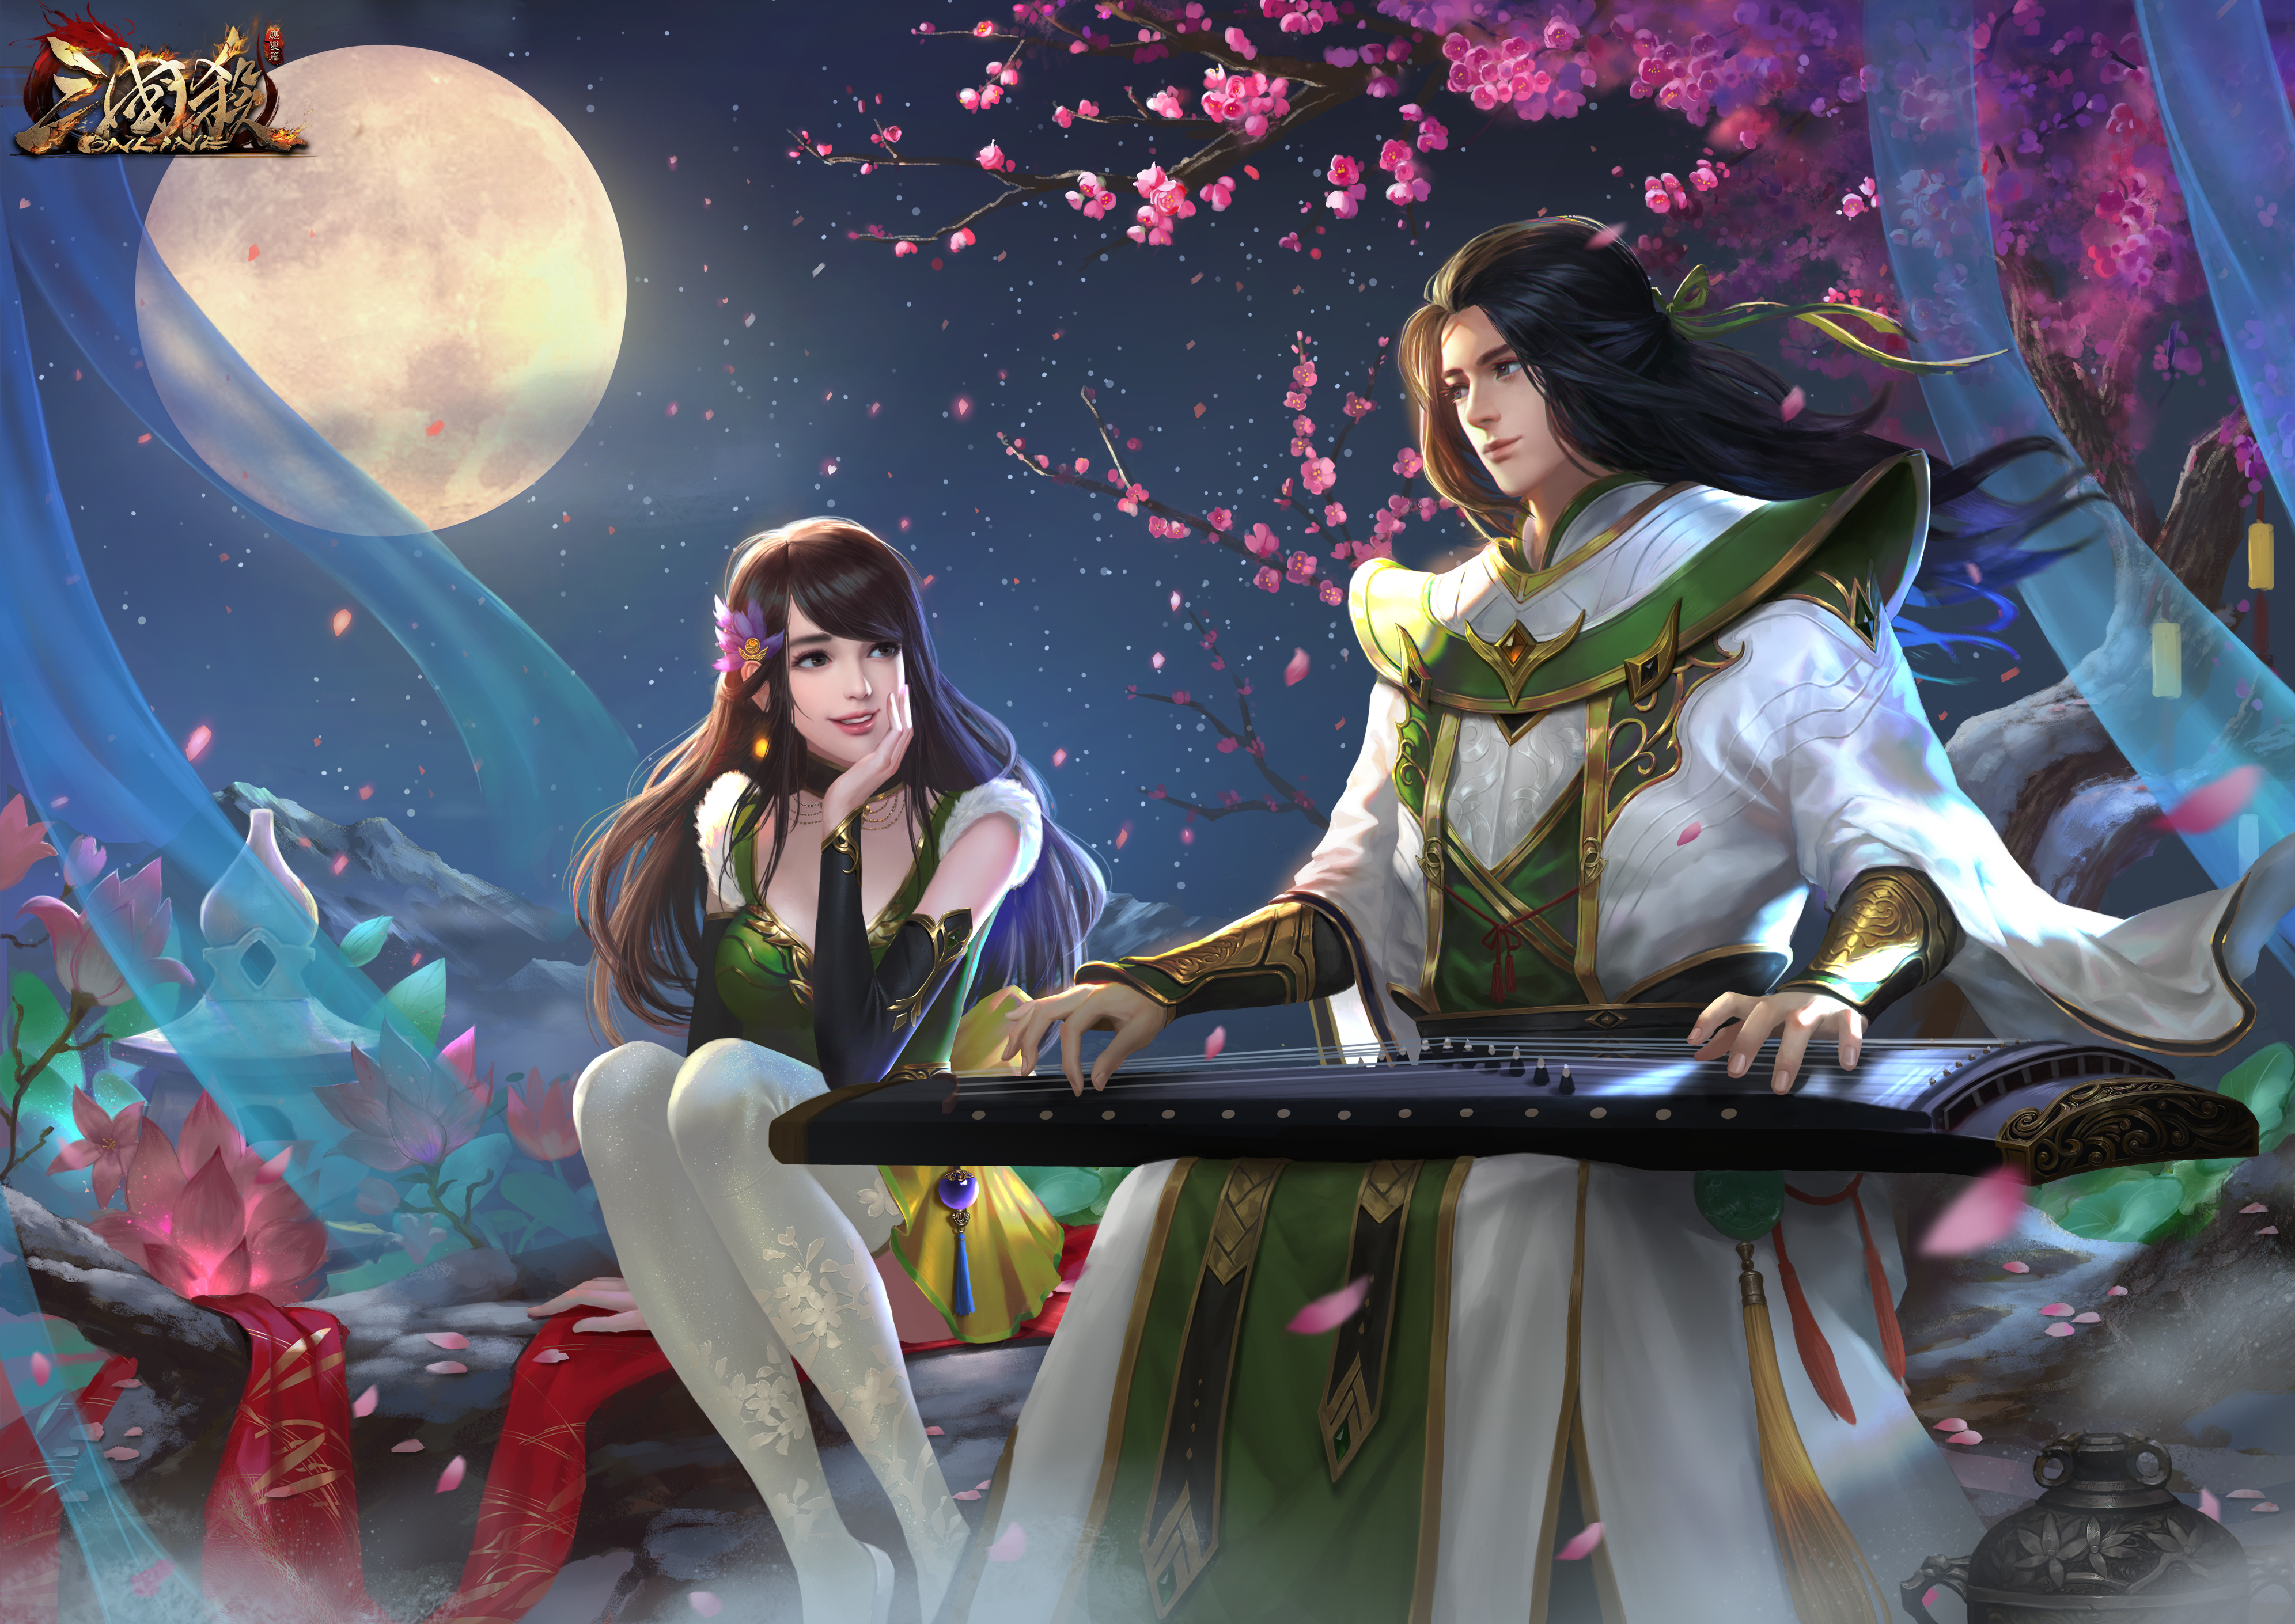 General 3984x2820 Three Kingdoms video game characters video games video game art petals flowers video game girls video game men musical instrument Moon